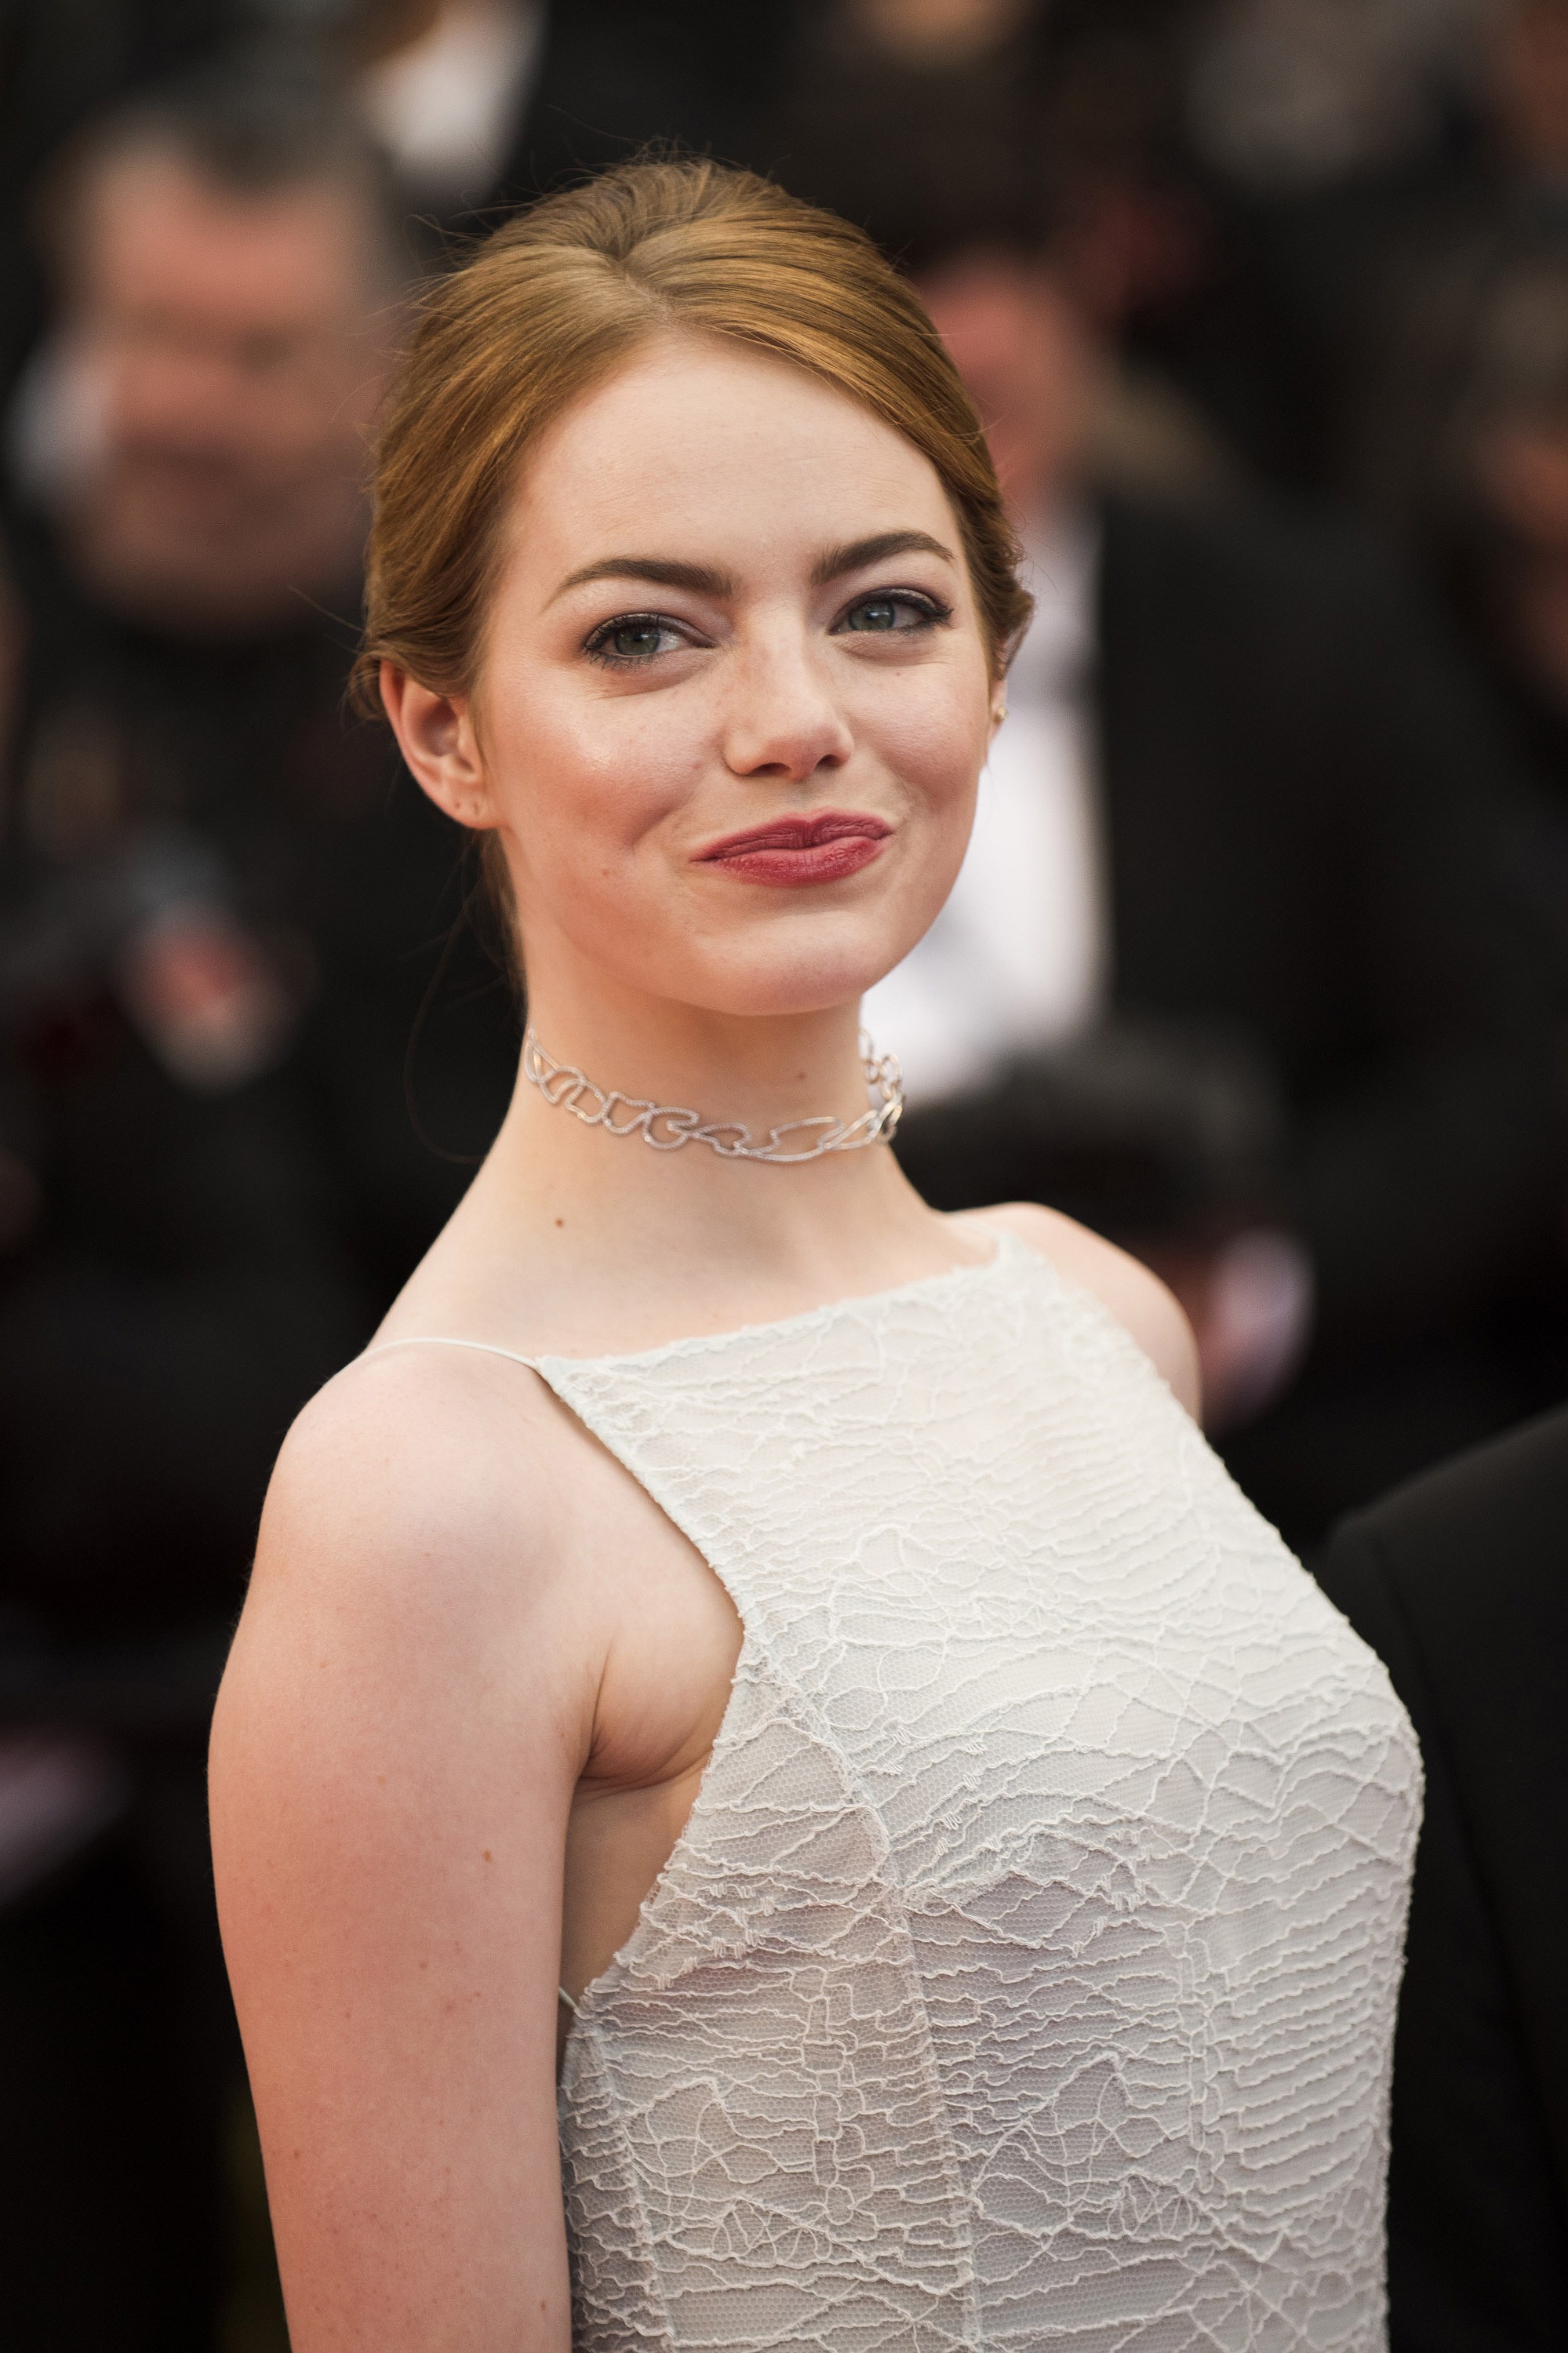 75+ Hot Pictures Of Emma Stone – Gwen Stacy Of Amazing Spiderman Movies With Interesting Facts. | Best Of Comic Books